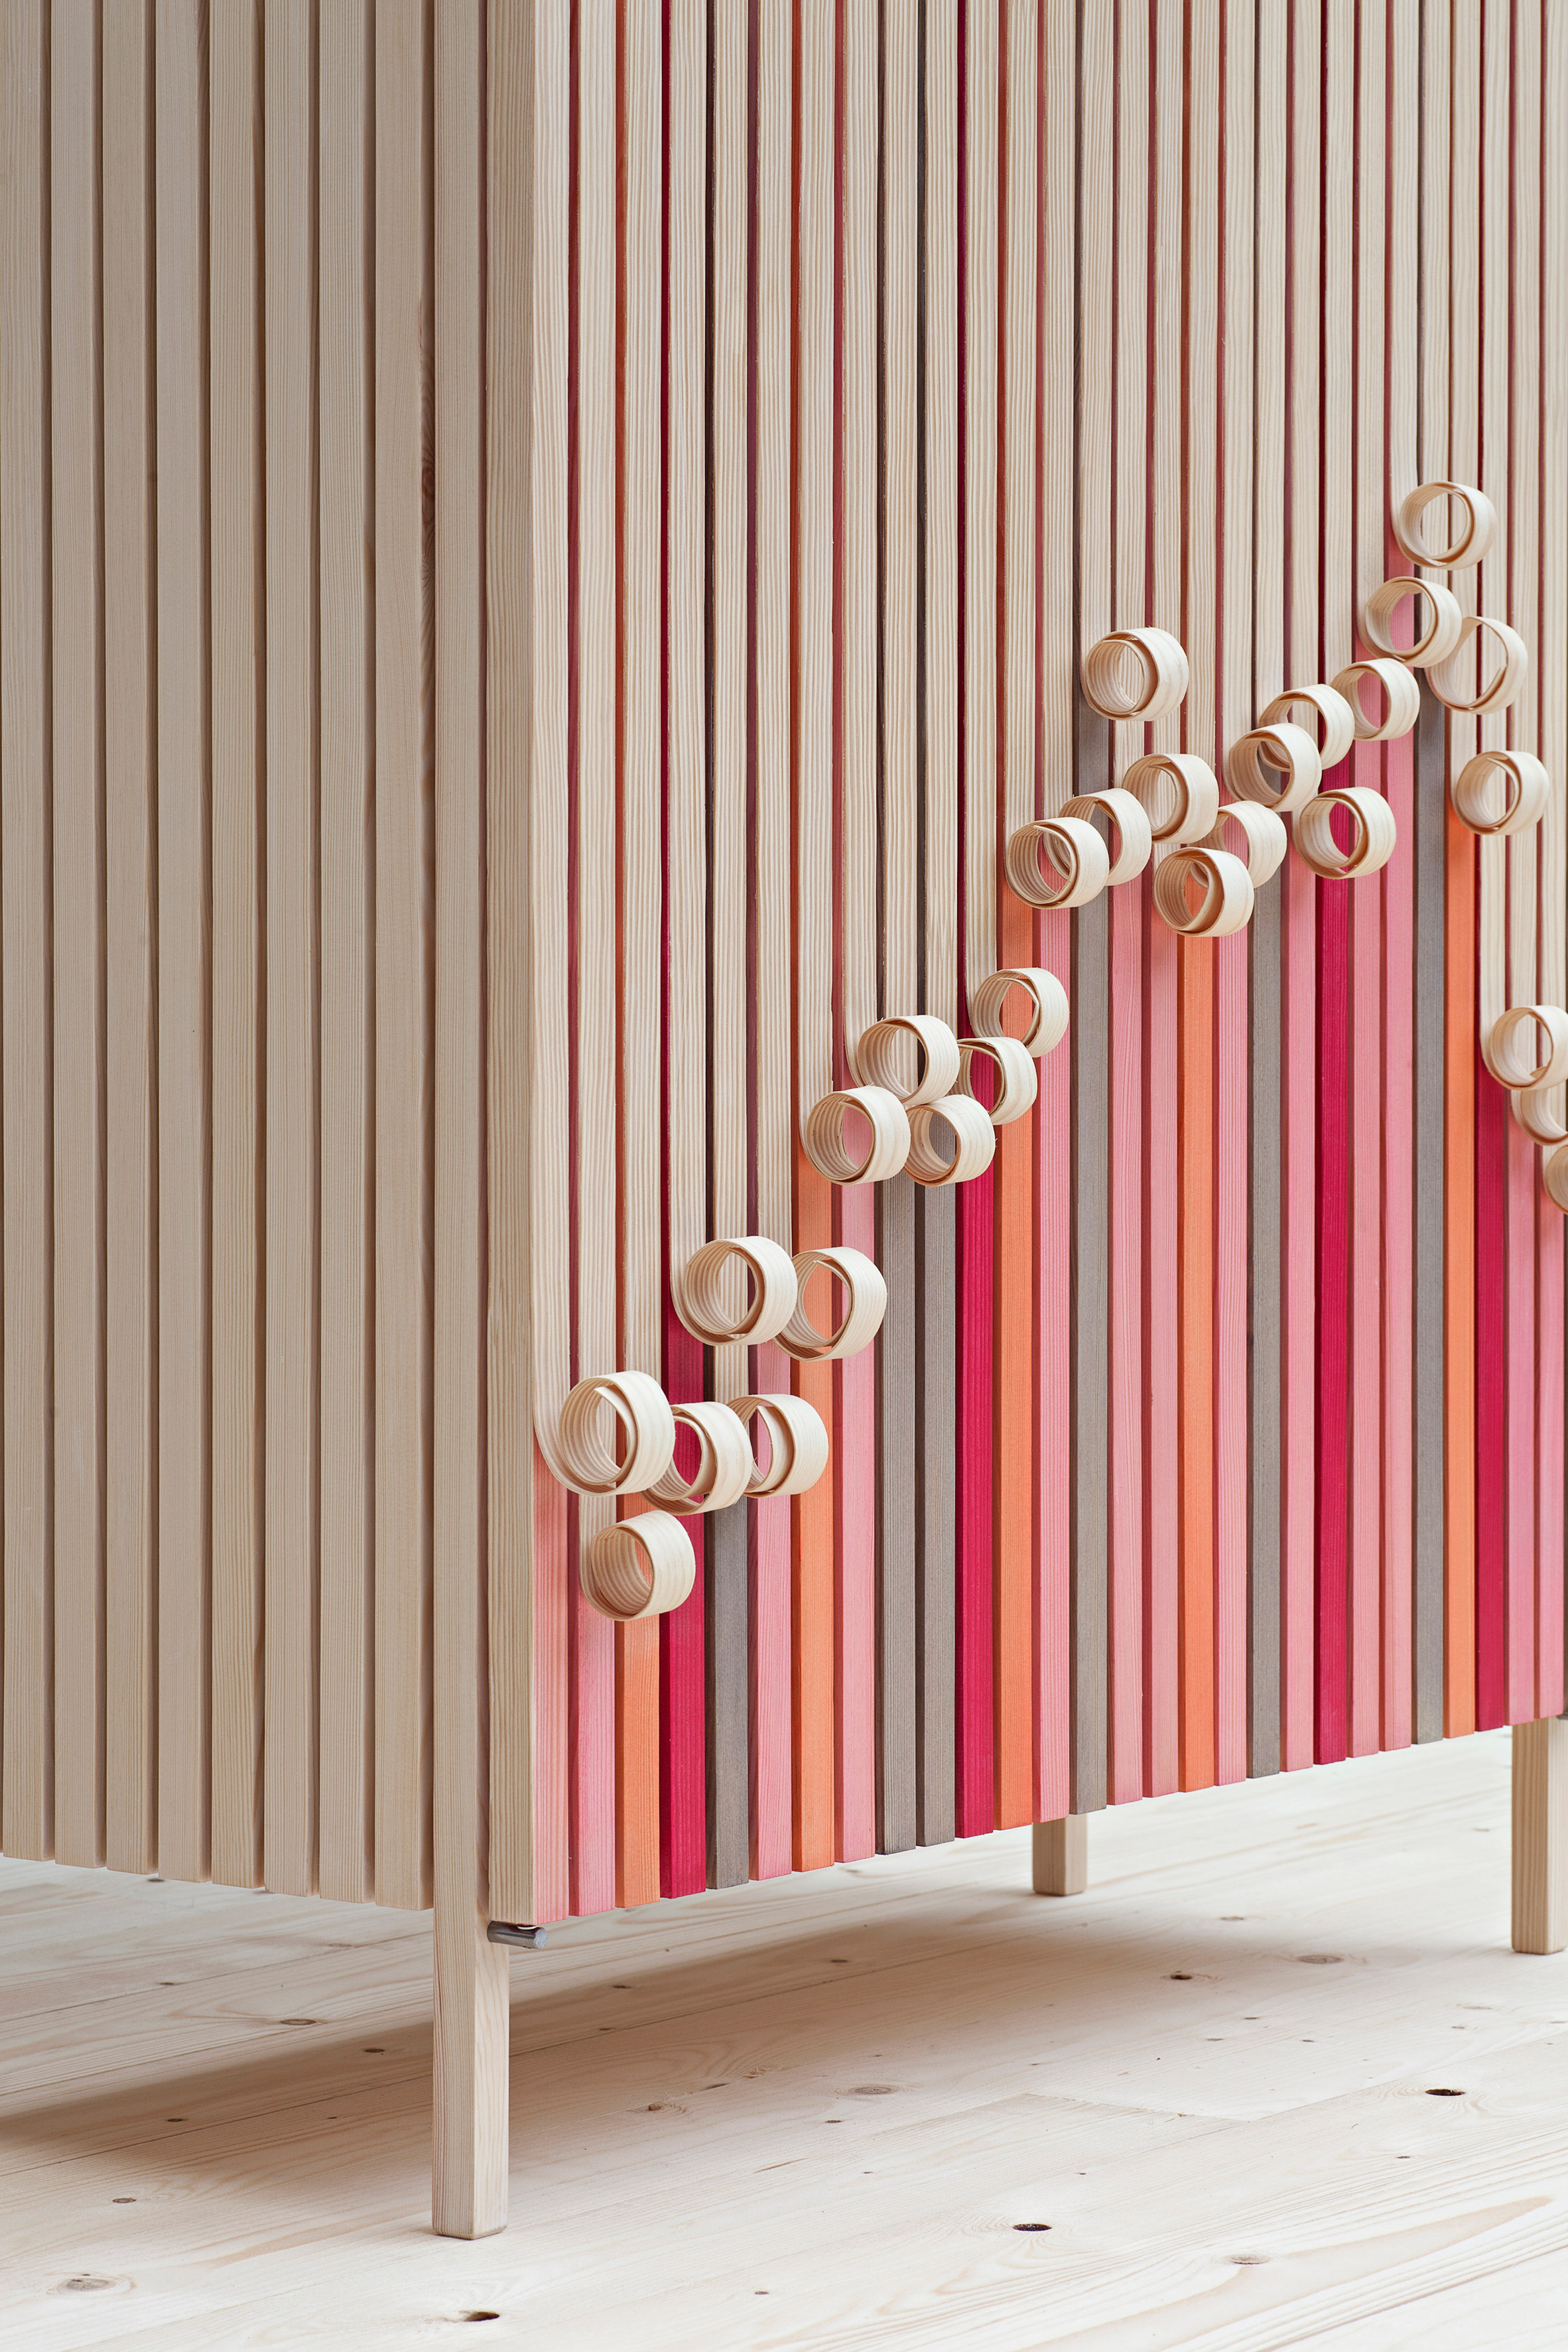 Stoft studio's Whittle Away cabinets peel away over time to reveal colourful panels underneath